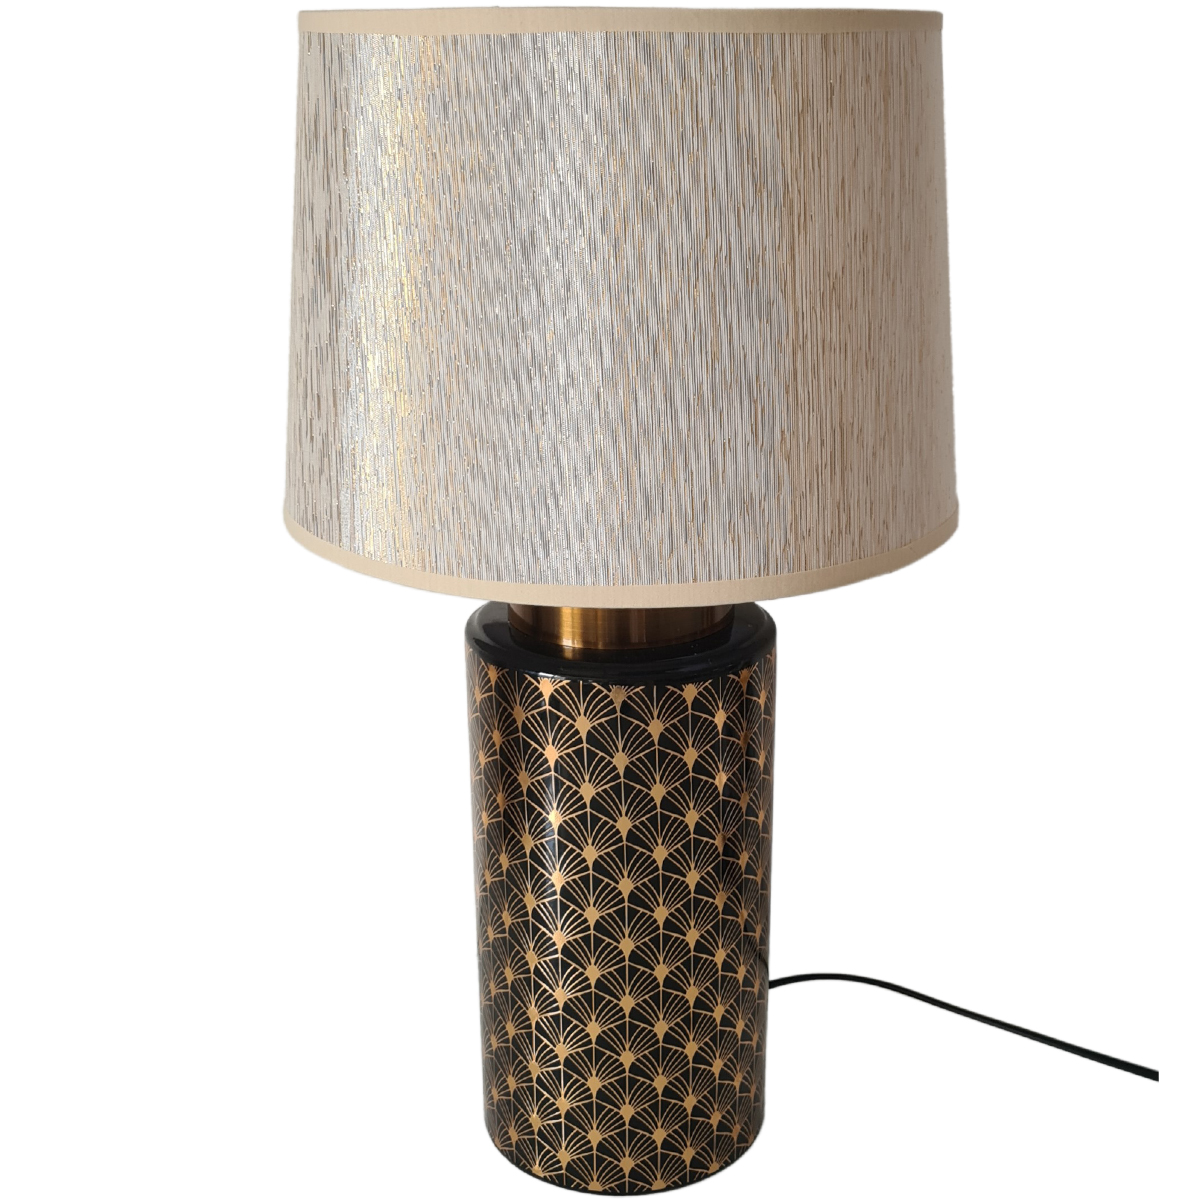 Black and gold art deco table lamp 49 cm